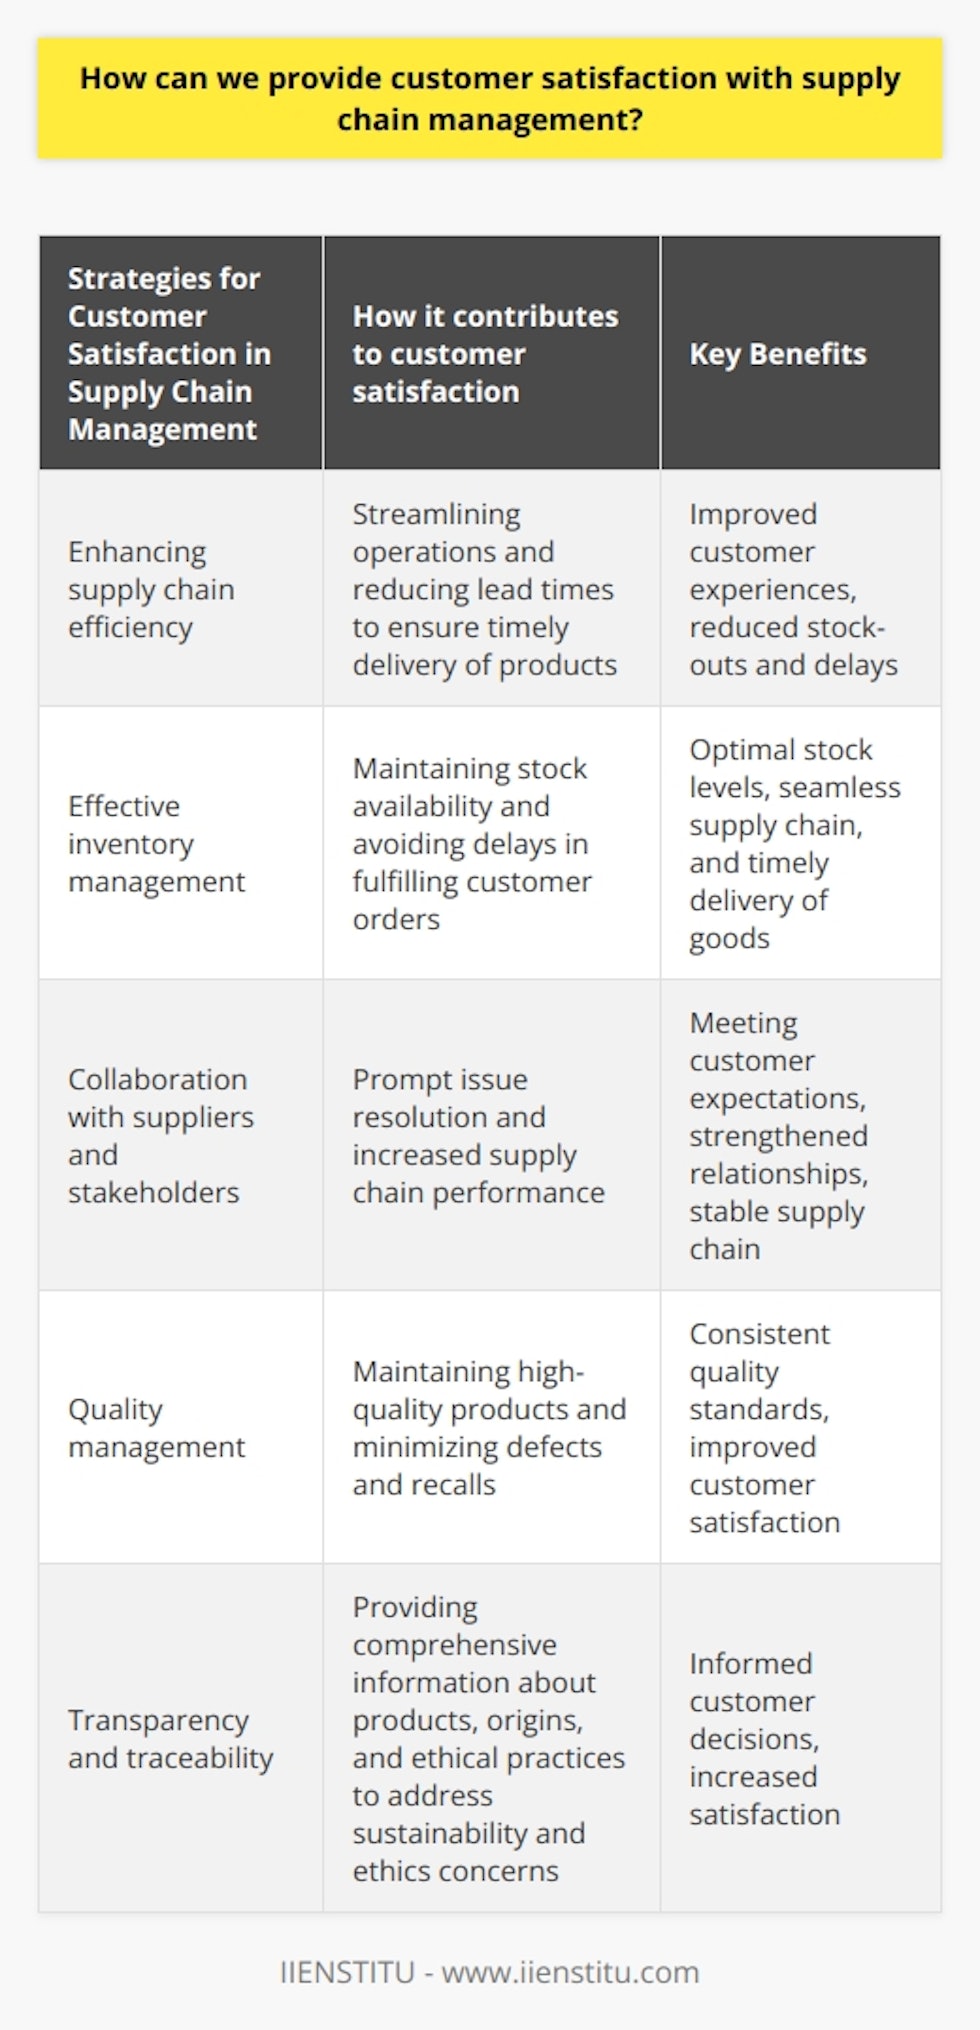 To provide customer satisfaction with supply chain management, companies need to prioritize supply chain efficiency. This can be achieved through the utilization of technology, automation, and communication systems that streamline operations and reduce lead times. By ensuring timely delivery of products, businesses can alleviate concerns related to stock-outs or delayed deliveries, ultimately improving customer experiences.Another crucial aspect of customer satisfaction is effective inventory management. By optimizing inventory levels, businesses can maintain stock availability and avoid delays in fulfilling customer orders. This can be accomplished through better demand forecasting, employing real-time data, and utilizing inventory tracking tools to keep optimal stock levels. Efficient inventory management contributes to a seamless supply chain and guarantees the timely delivery of goods to customers.Strong collaboration with suppliers and other supply chain stakeholders is essential to ensure customer satisfaction. Regular communication with suppliers allows companies to address and resolve issues promptly. This proactive approach not only improves overall supply chain performance but also increases the likelihood of meeting customers' expectations. Sharing information and best practices further strengthens these relationships and results in a more effective and stable supply chain.Meeting the quality standards expected by customers is another crucial aspect of customer satisfaction within supply chain management. Implementing quality management systems aids businesses in maintaining high-quality products throughout the entire supply chain, from procurement to delivery. Adhering to quality standards minimizes instances of product defects and recalls, which can have a severe impact on customer satisfaction.Transparency and traceability are vital elements in supply chain management that contribute to higher customer satisfaction. By providing comprehensive information about products, their origins, and ethical practices, businesses can address customers' concerns regarding sustainability and ethics. Implementing traceability solutions allows customers to make informed decisions, ultimately leading to increased satisfaction.In conclusion, to provide customer satisfaction with supply chain management, businesses should focus on enhancing supply chain efficiency, effective inventory management, collaboration with suppliers, quality management, and promoting transparency and traceability. By implementing these strategies, companies can create a customer-centric supply chain that meets customers' expectations and encourages loyalty.